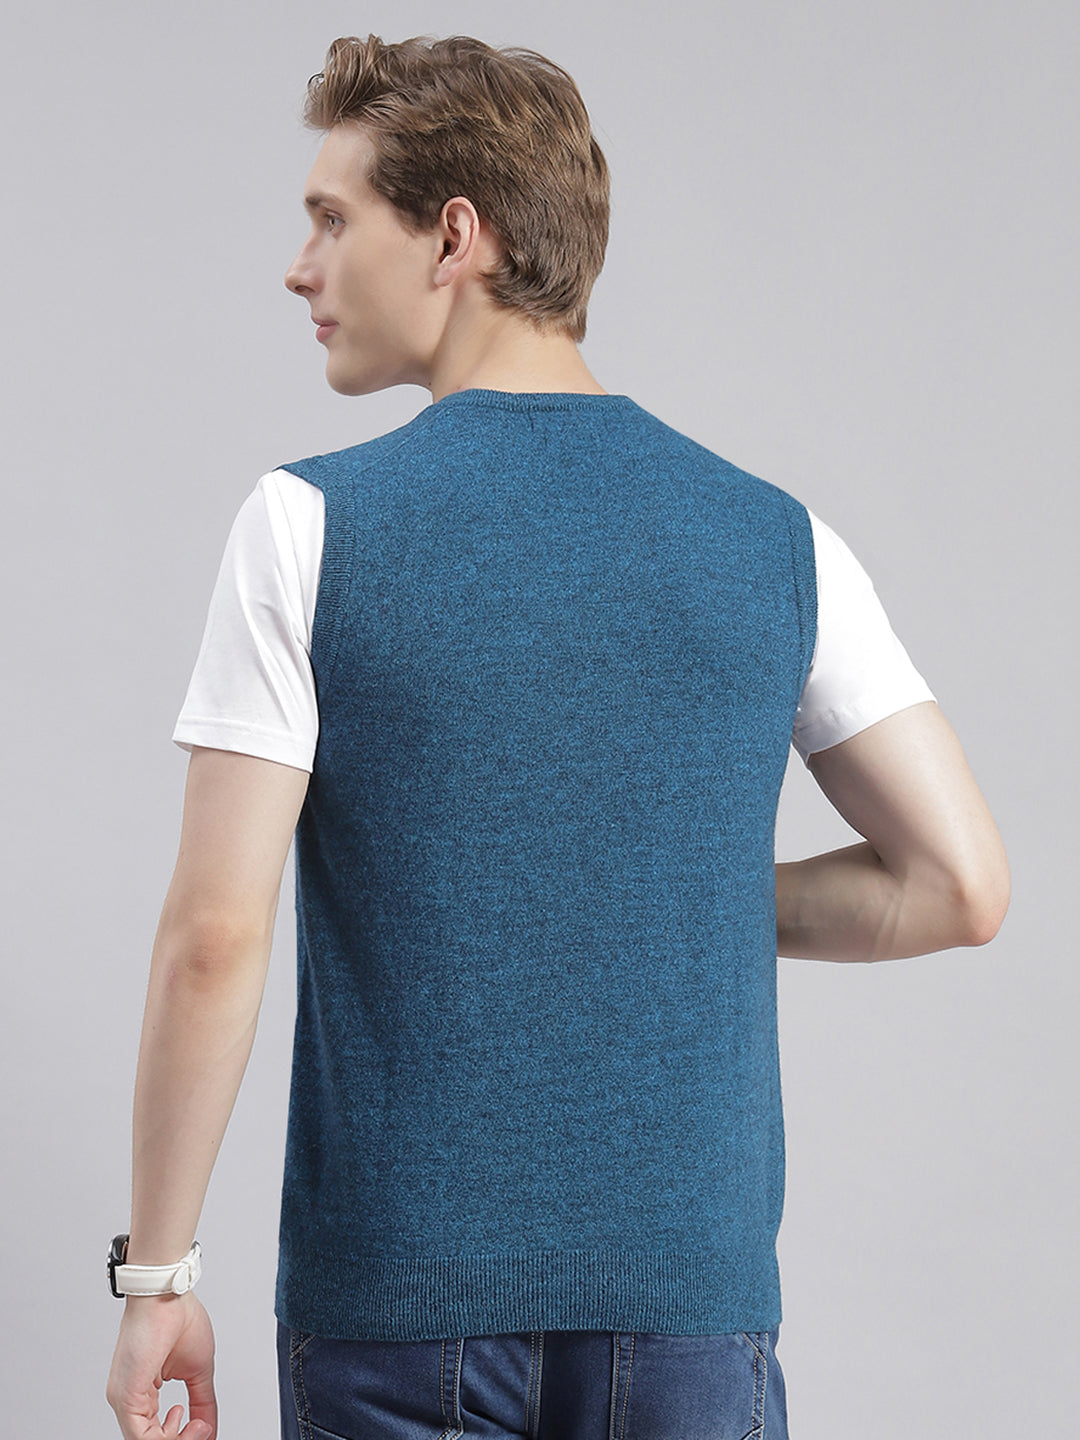 Men Teal Blue Solid V Neck Sleeveless Sweaters/Pullovers